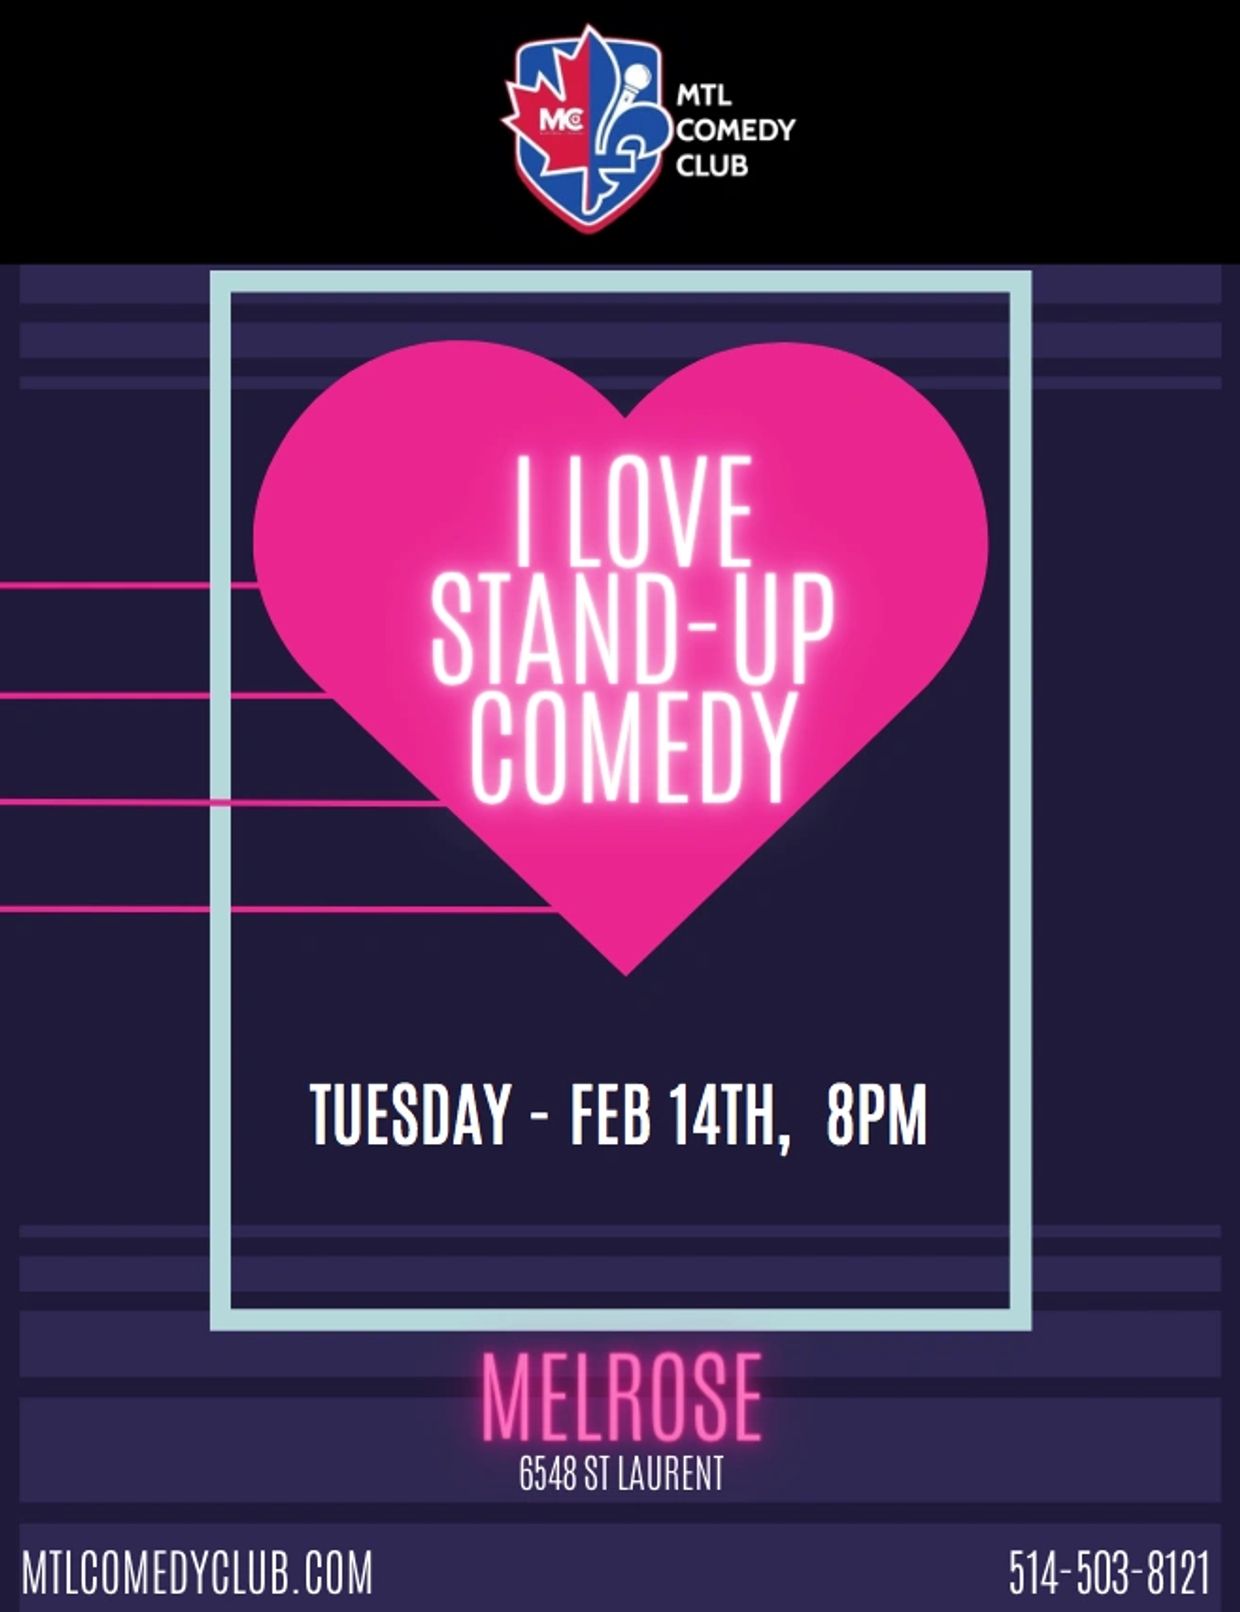  Night of laughter and love with the ultimate Valentine's Day stand-up comedy show! 
